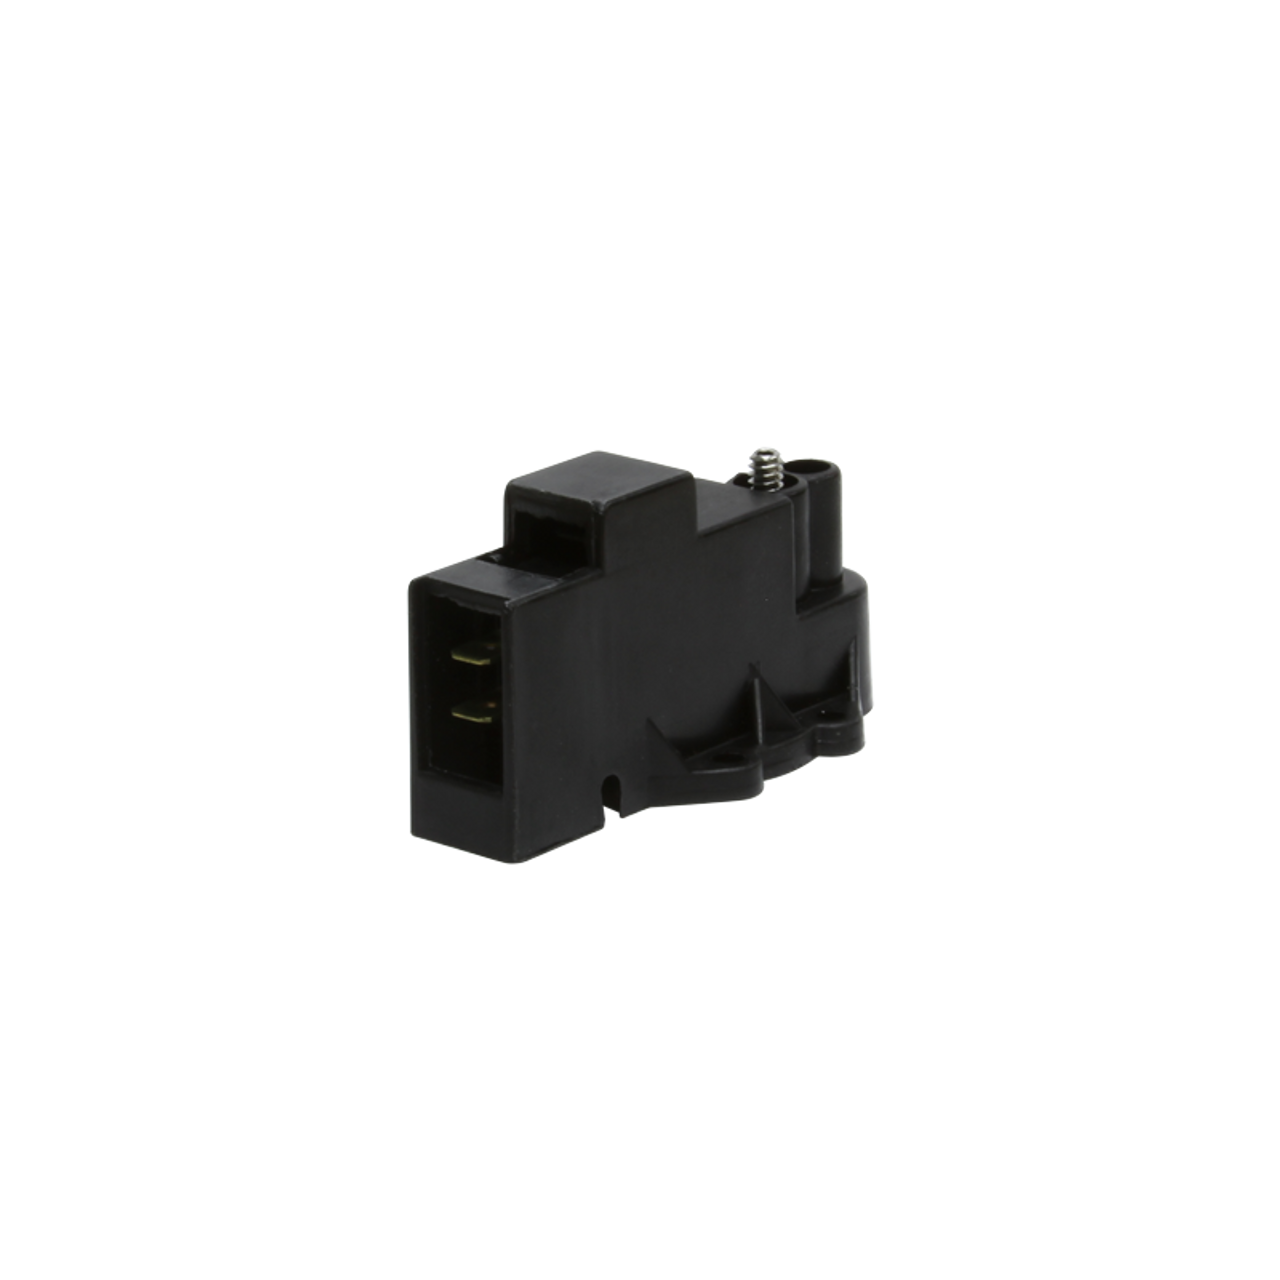 Replacement Switch for C305 Pump